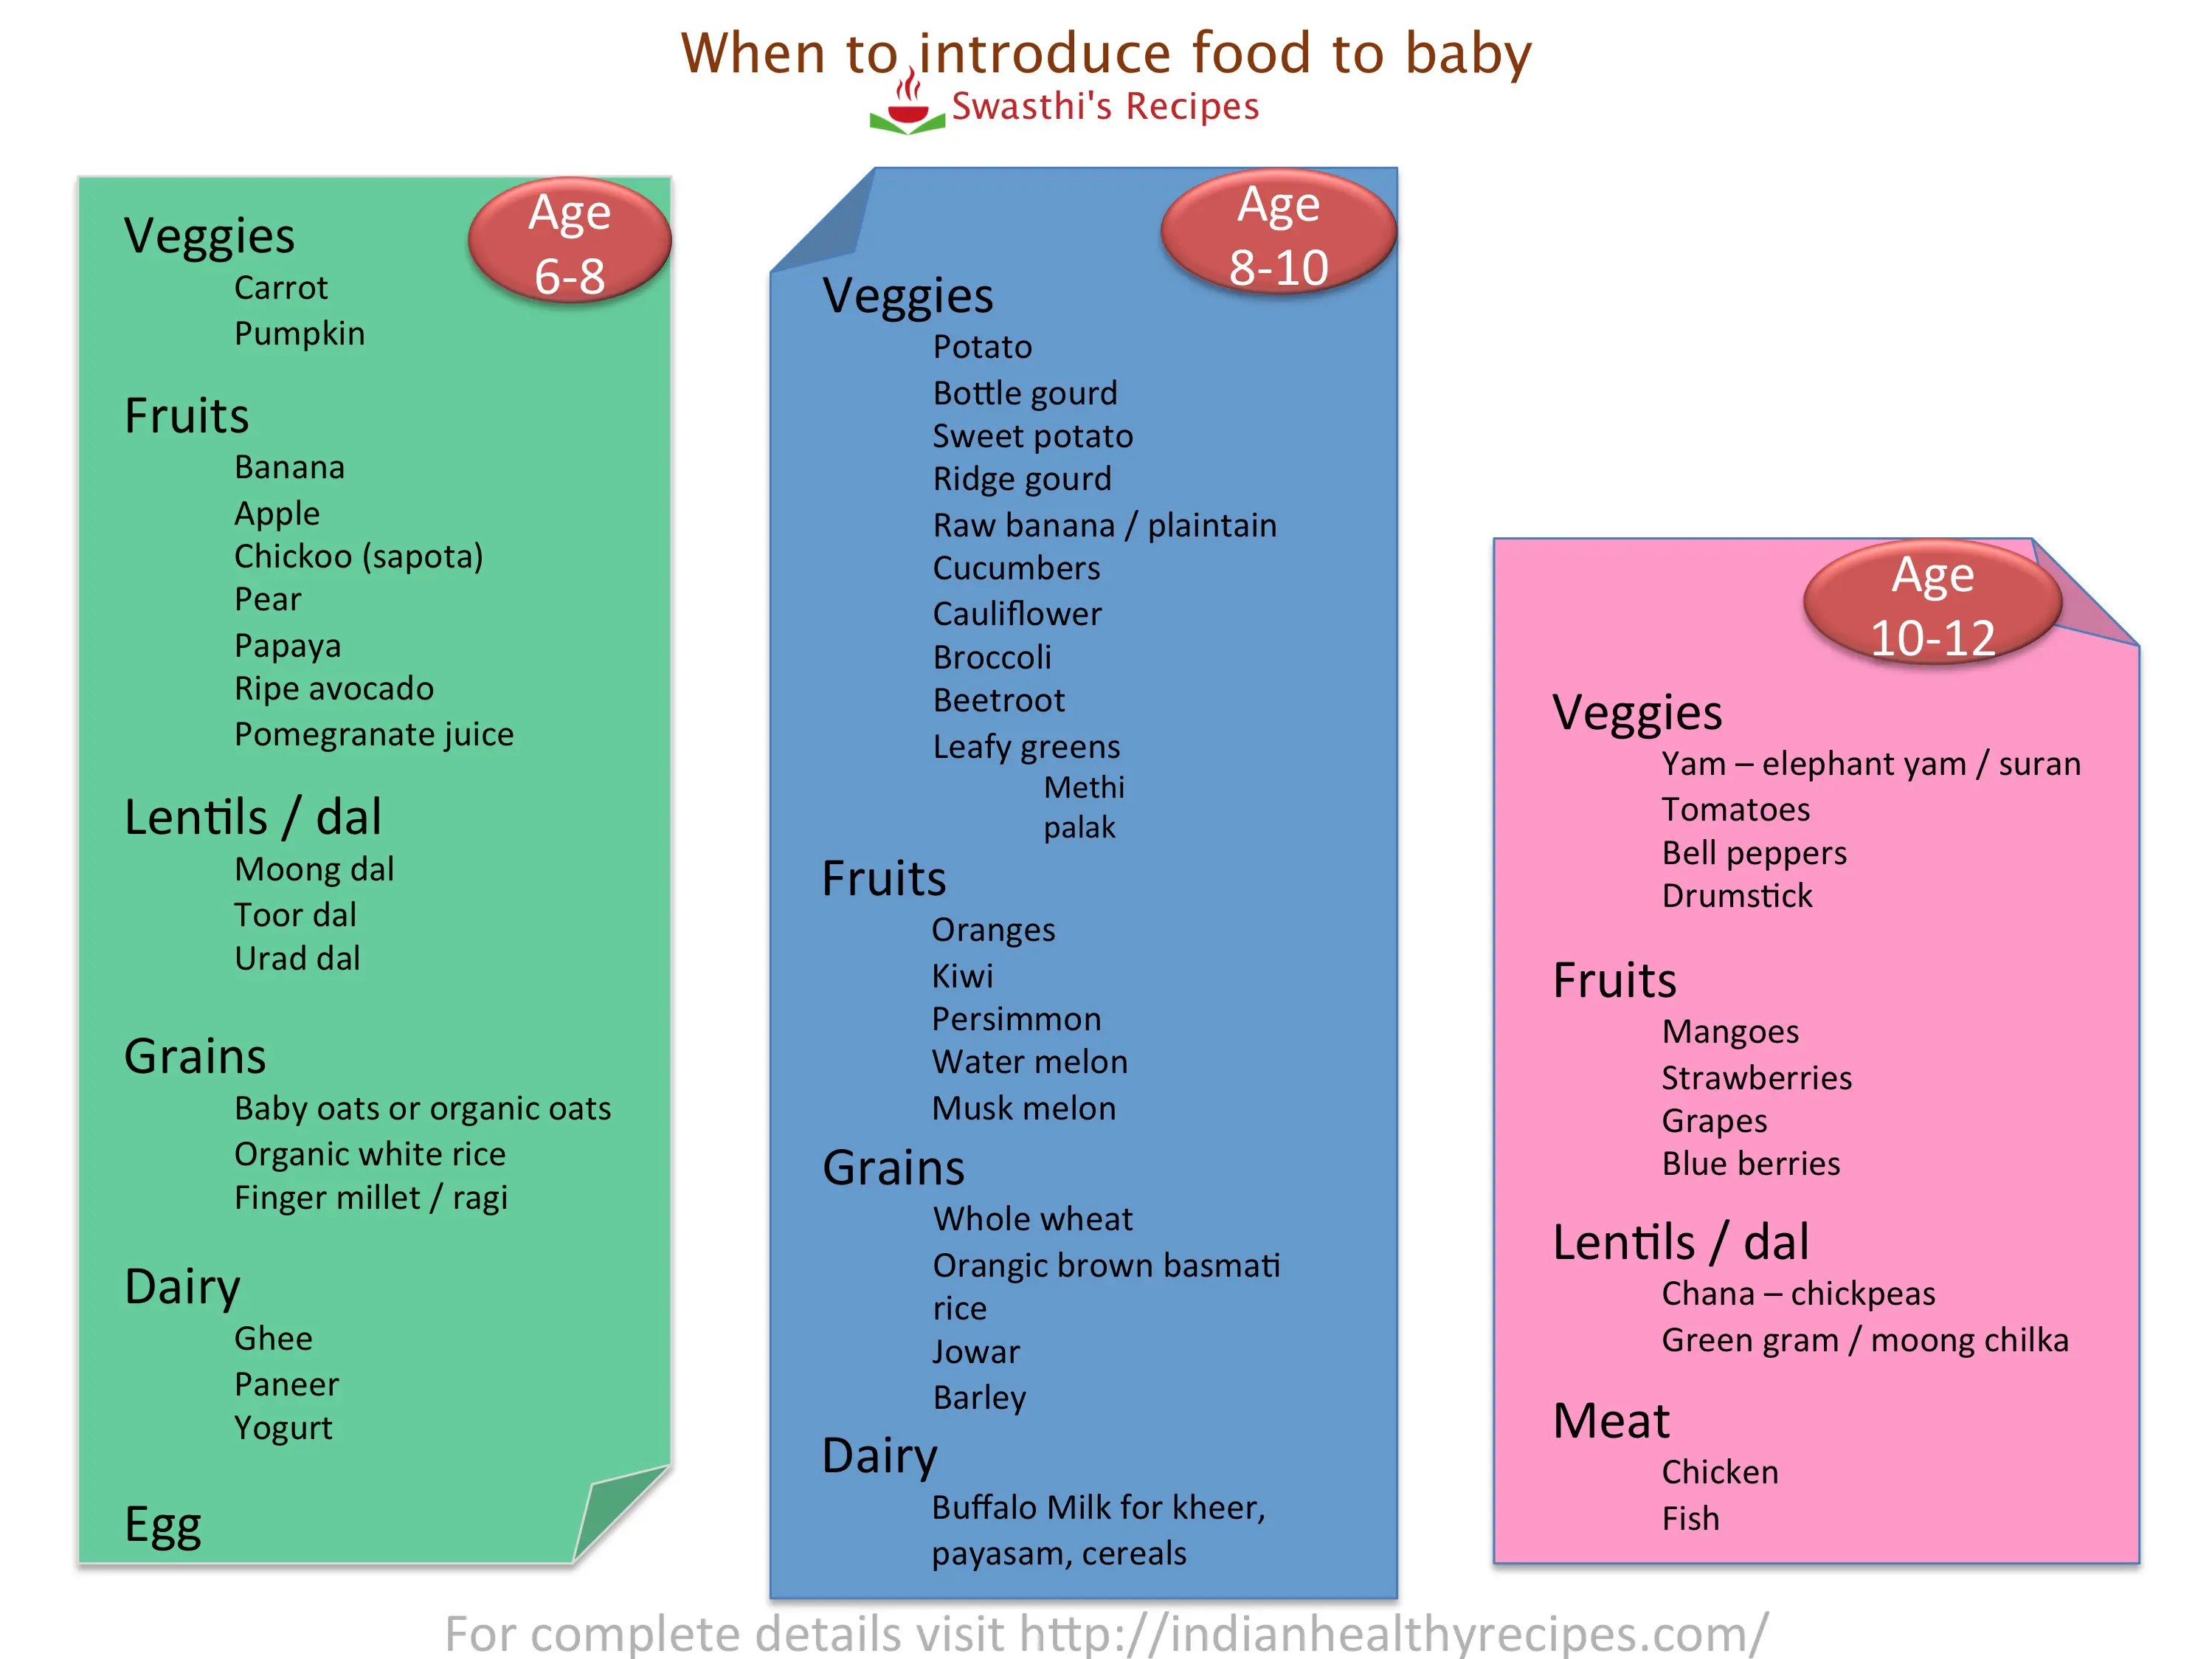 6-month-old feeding schedule: Timetable